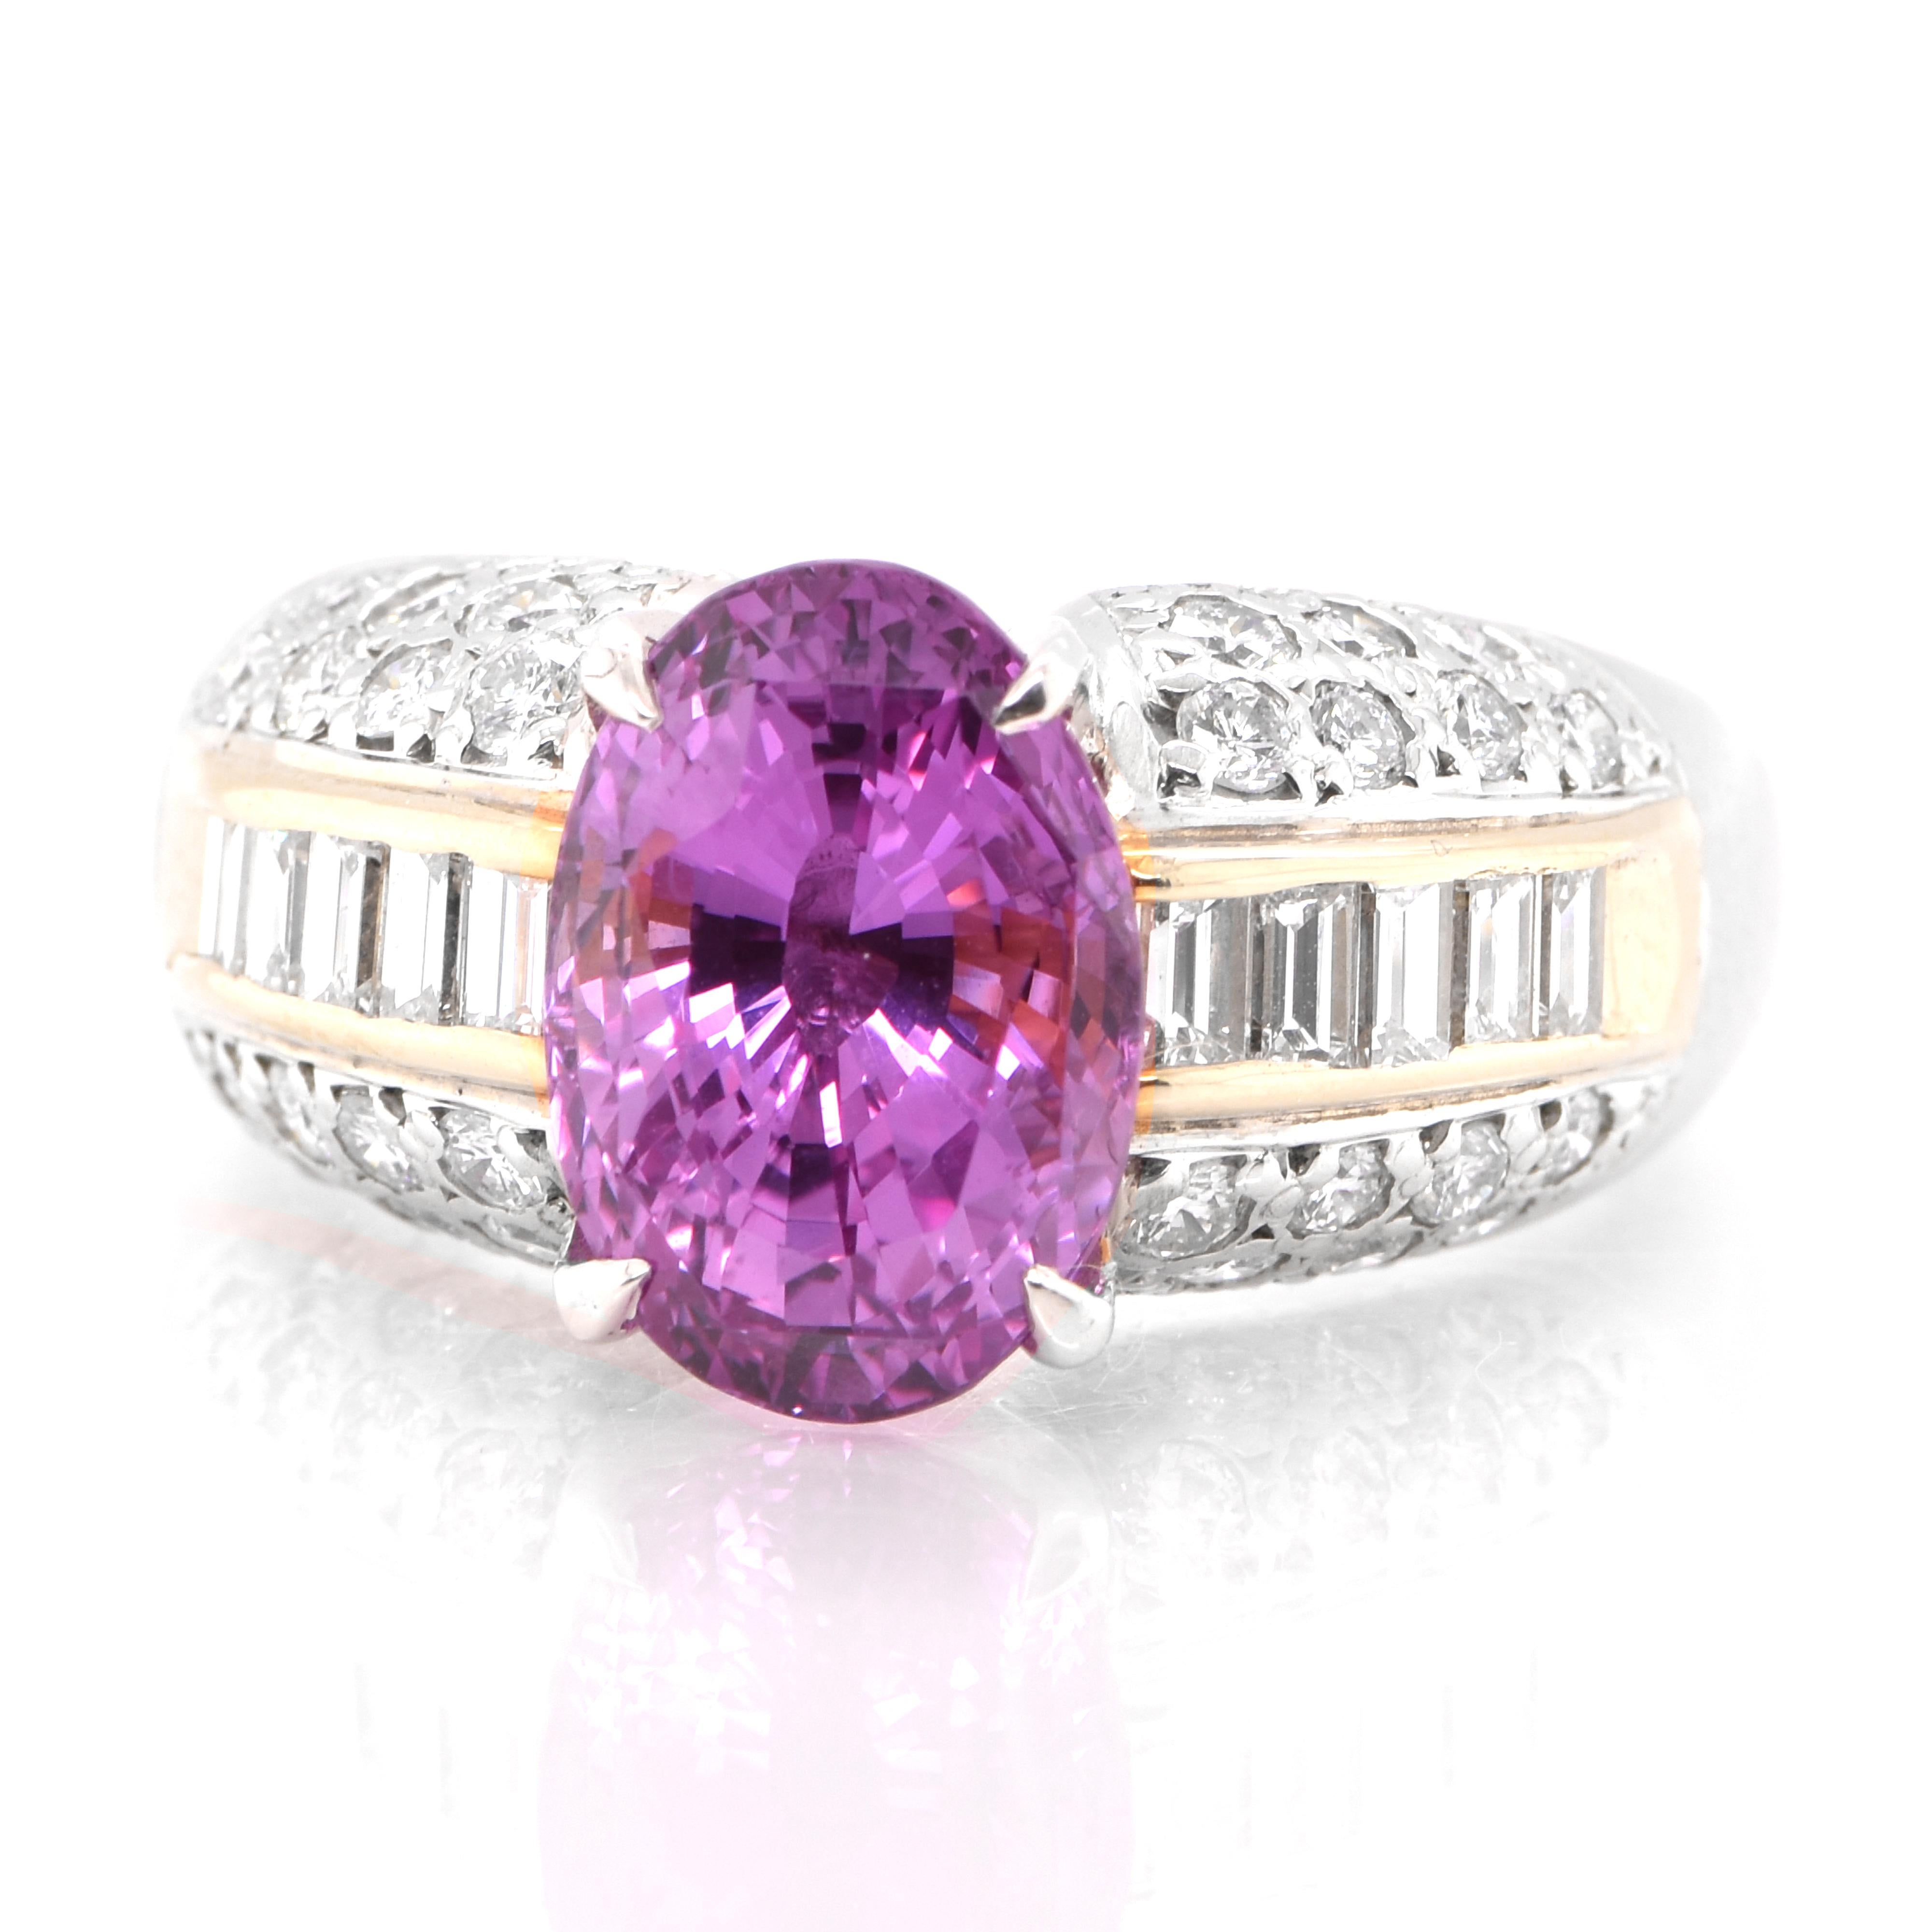 Modern GIA Certified 5.06 Carat Natural Pink Sapphire Ring Set in Platinum and 18K Gold